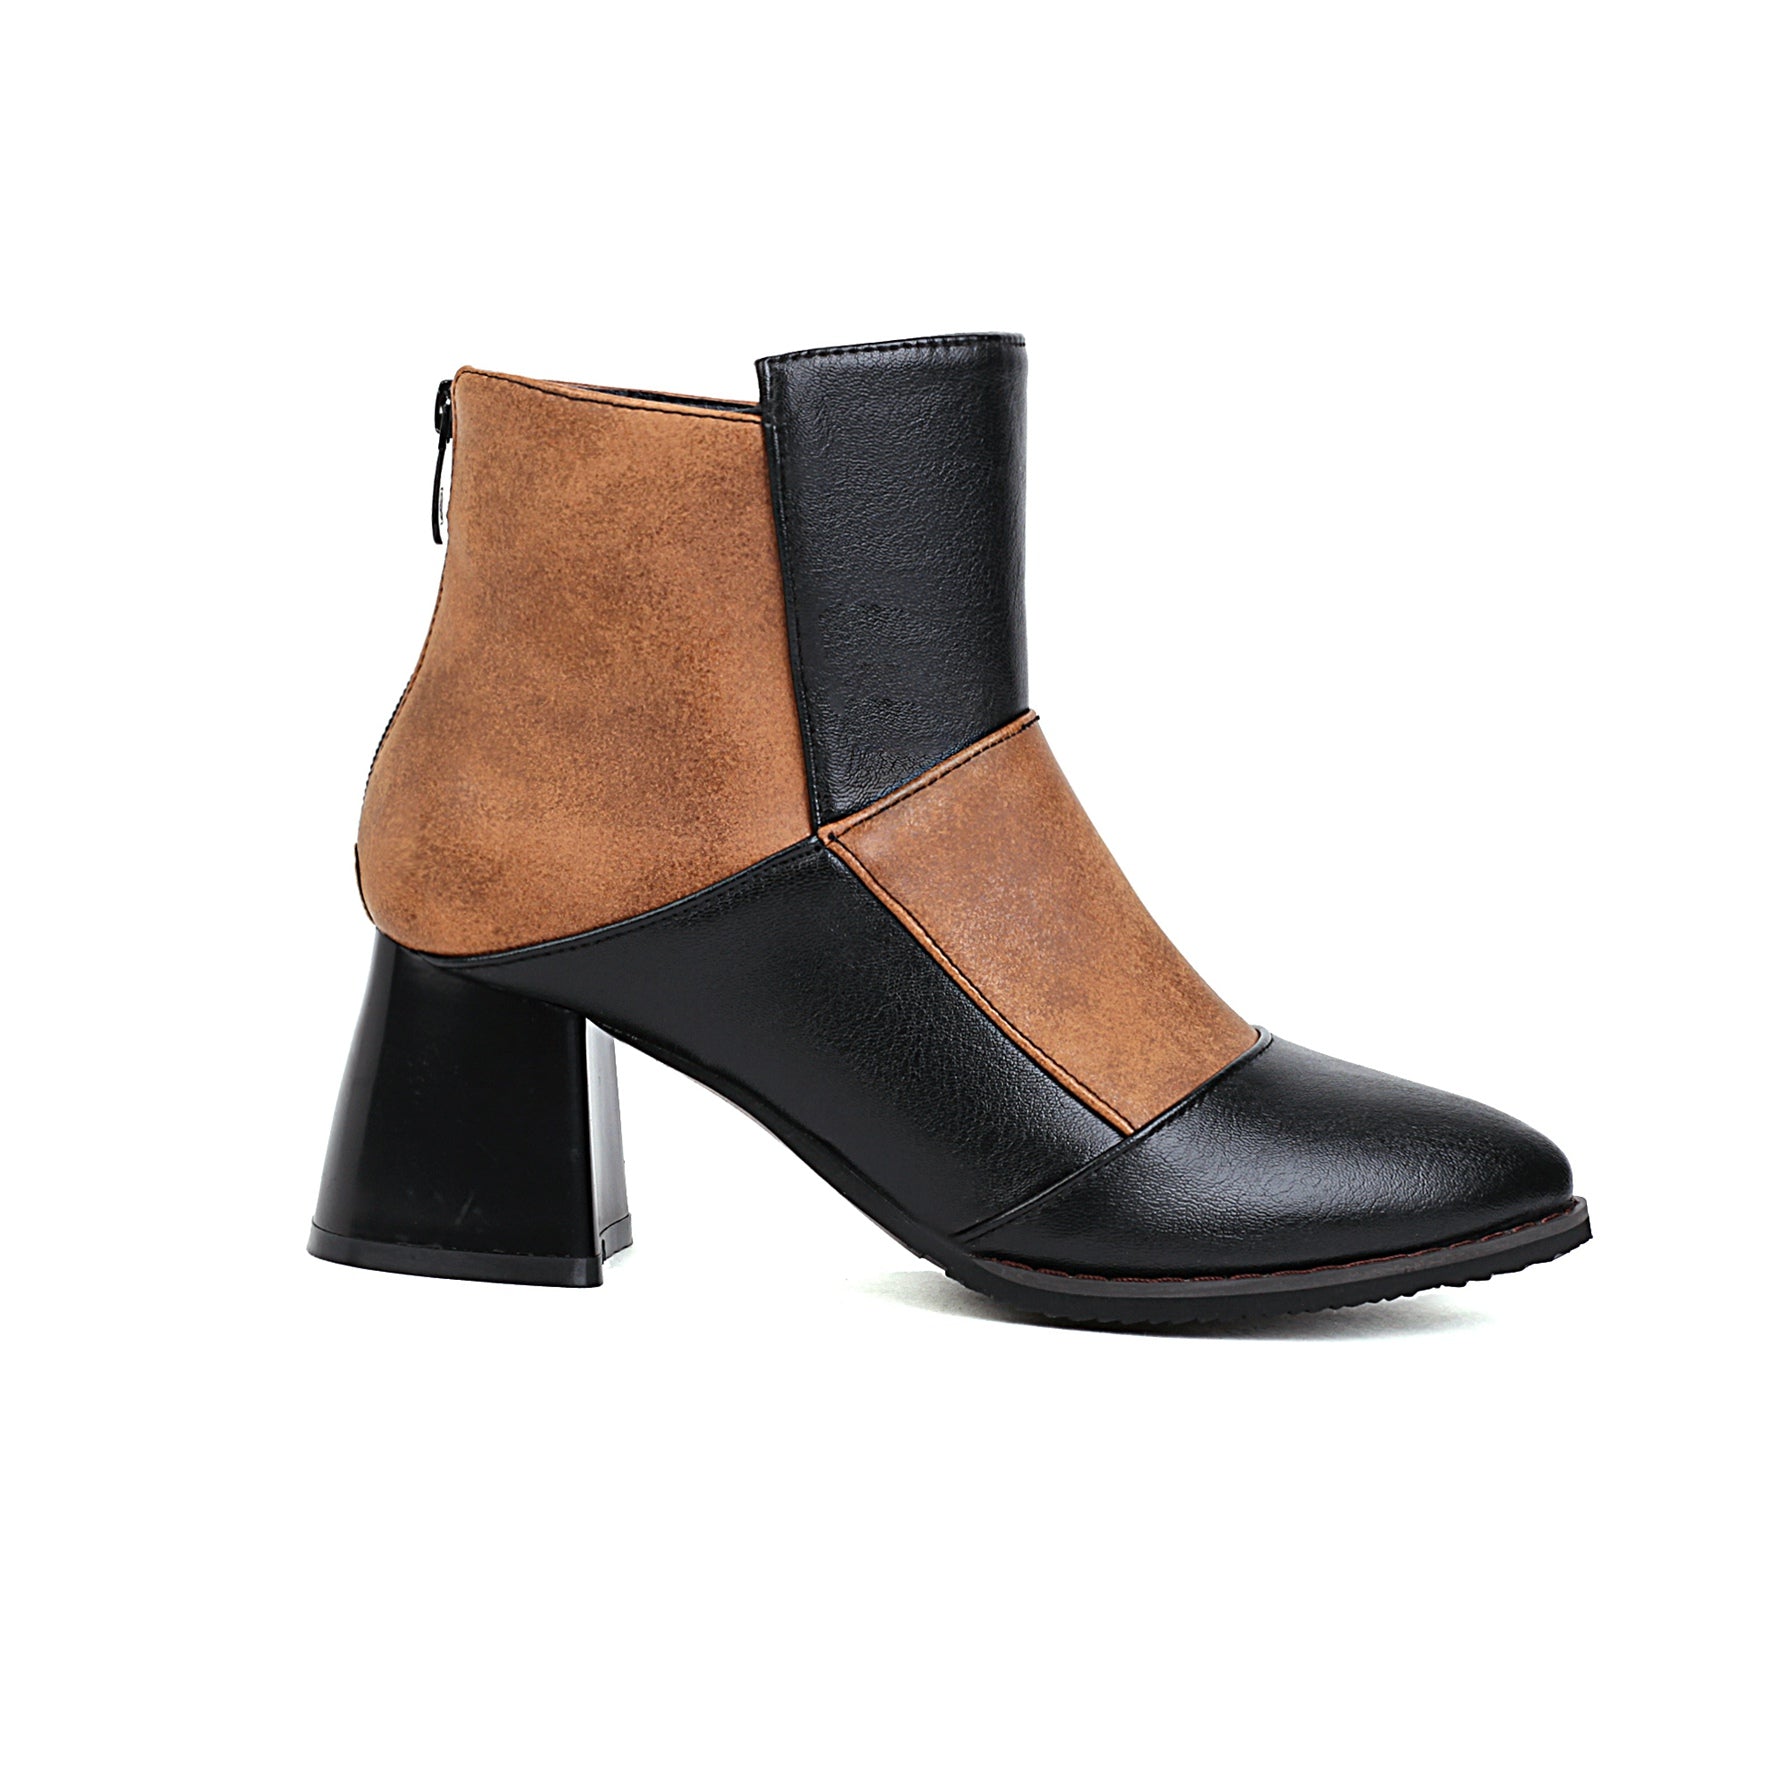 Bigsizeheels Retro thick heel Ankle Boots - Brown freeshipping - bigsizeheel®-size5-size15 -All Plus Sizes Available!